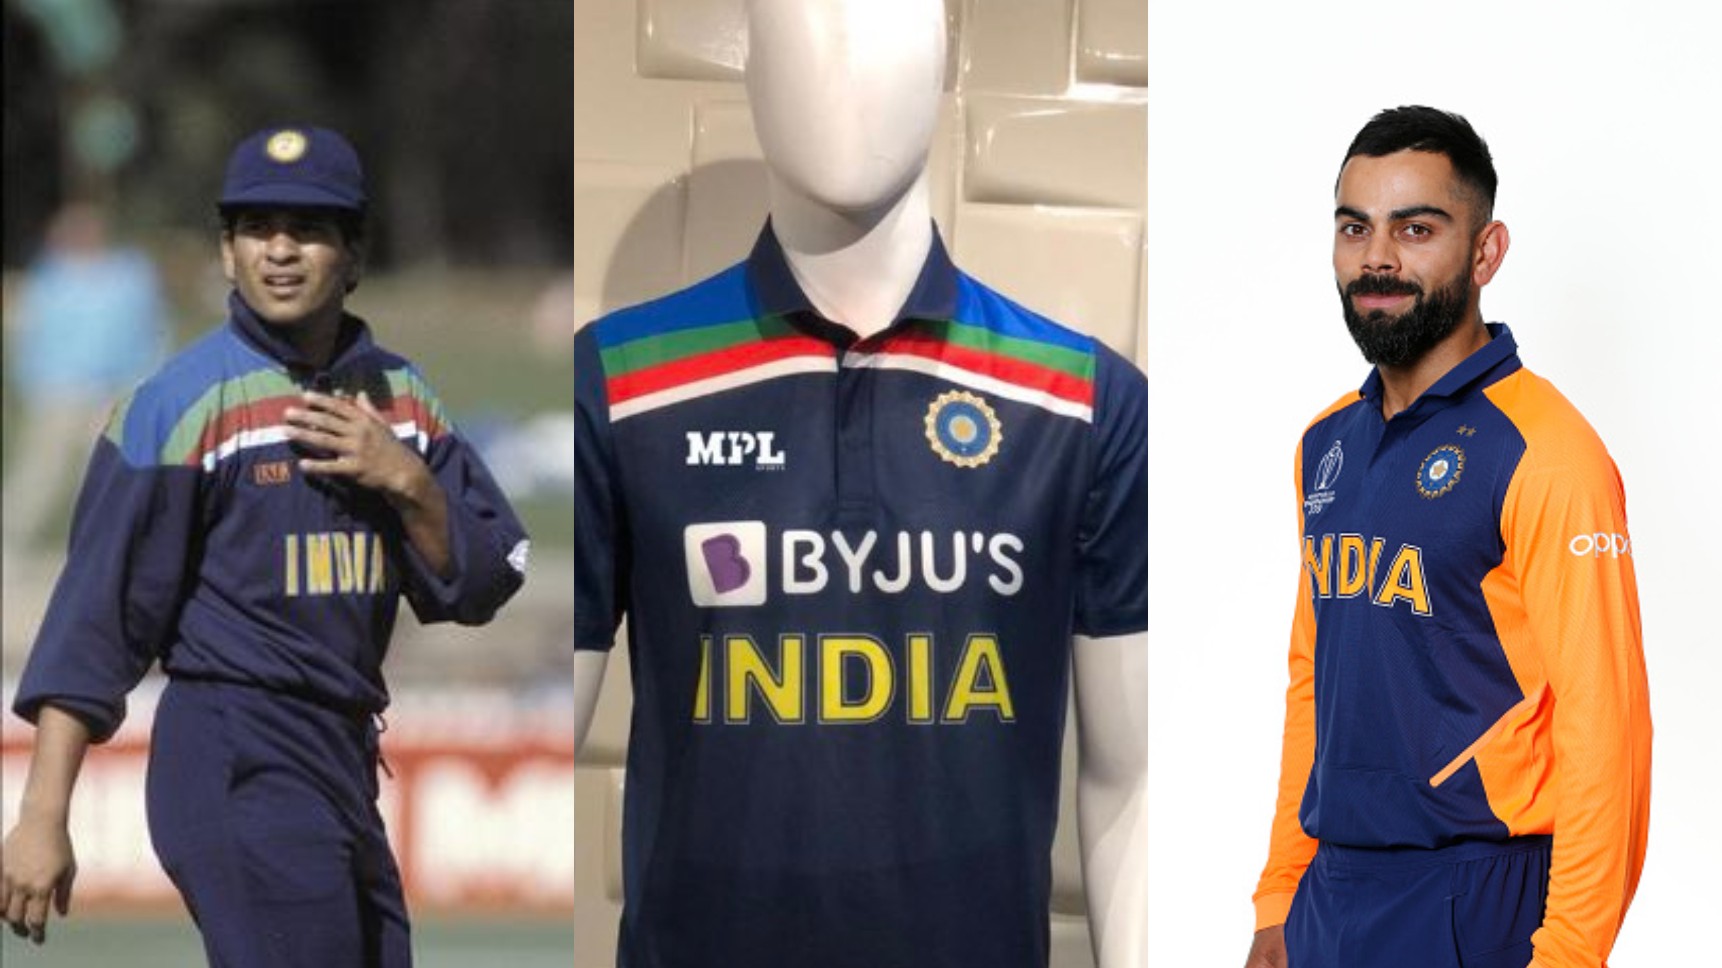 AUS v IND 2020-21: Virat Kohli opted for 1992 World Cup-themed retro jersey as new sponsors played safe